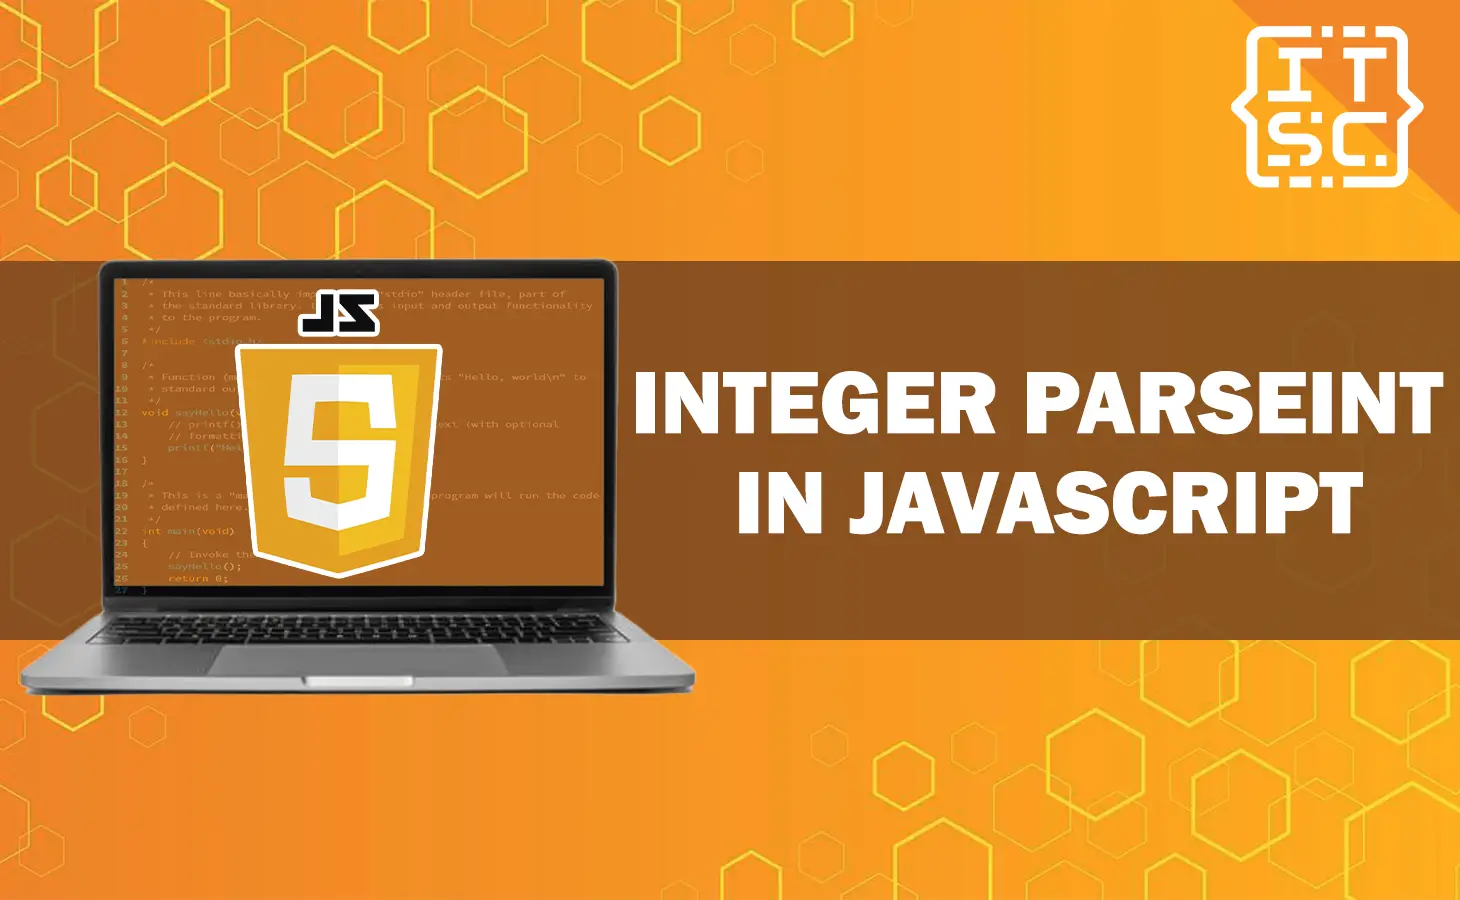 How to convert String into Integer using parseInt() in JavaScript?